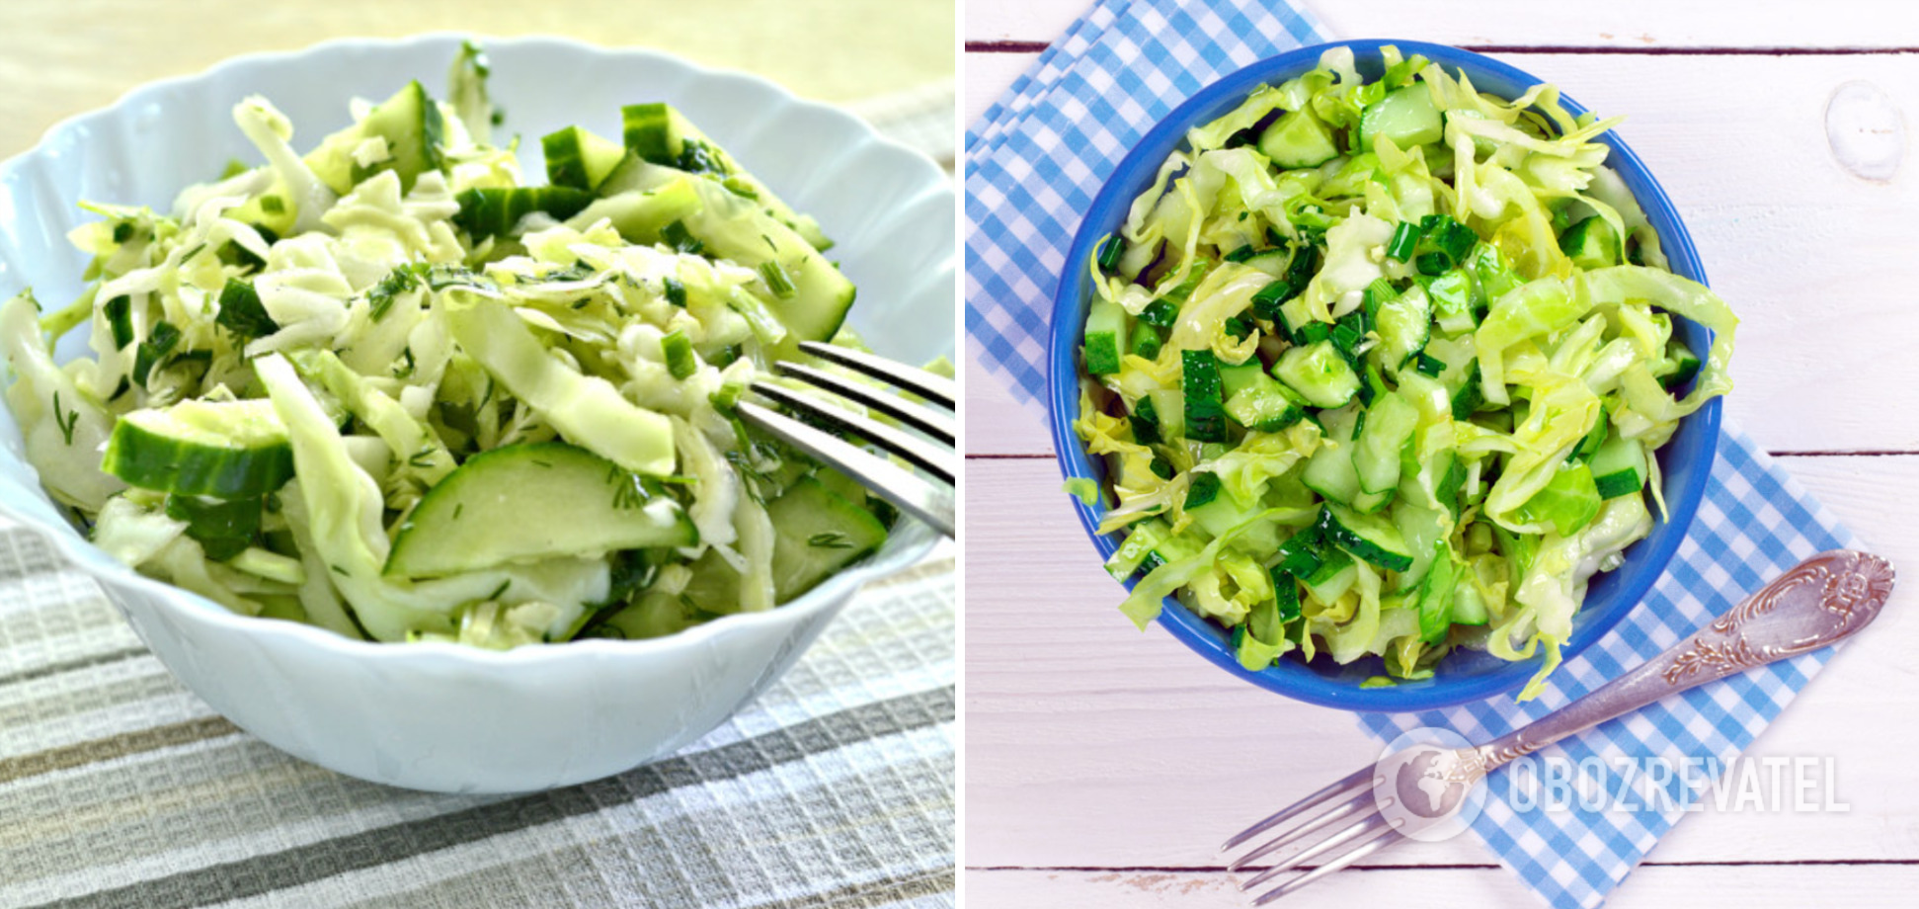 Cabbage salad without mayonnaise